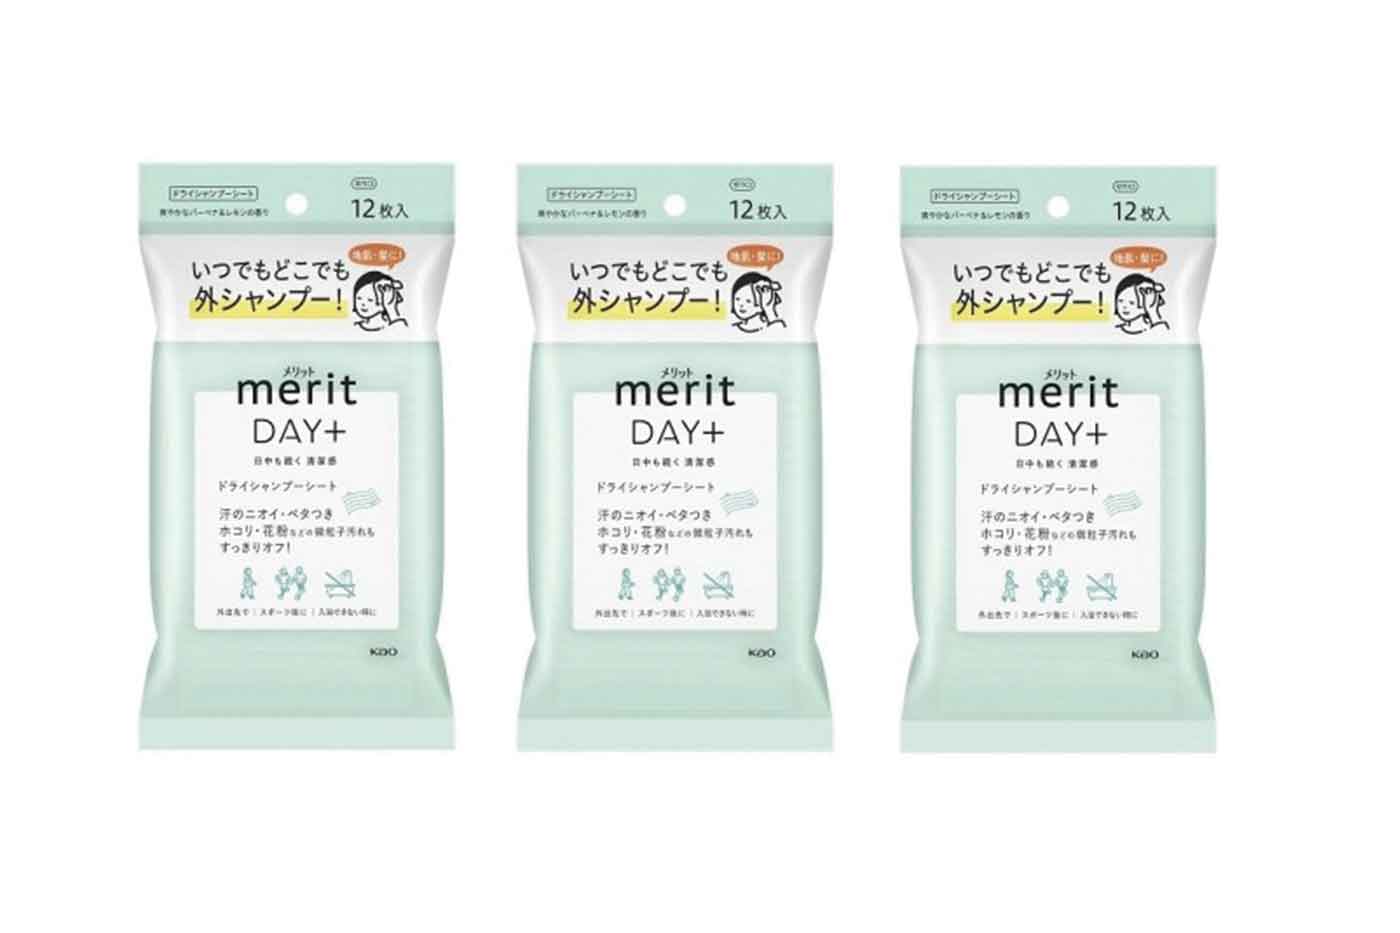 Japanese personal care brand Kao introduces a waterless dry shampoo sheet